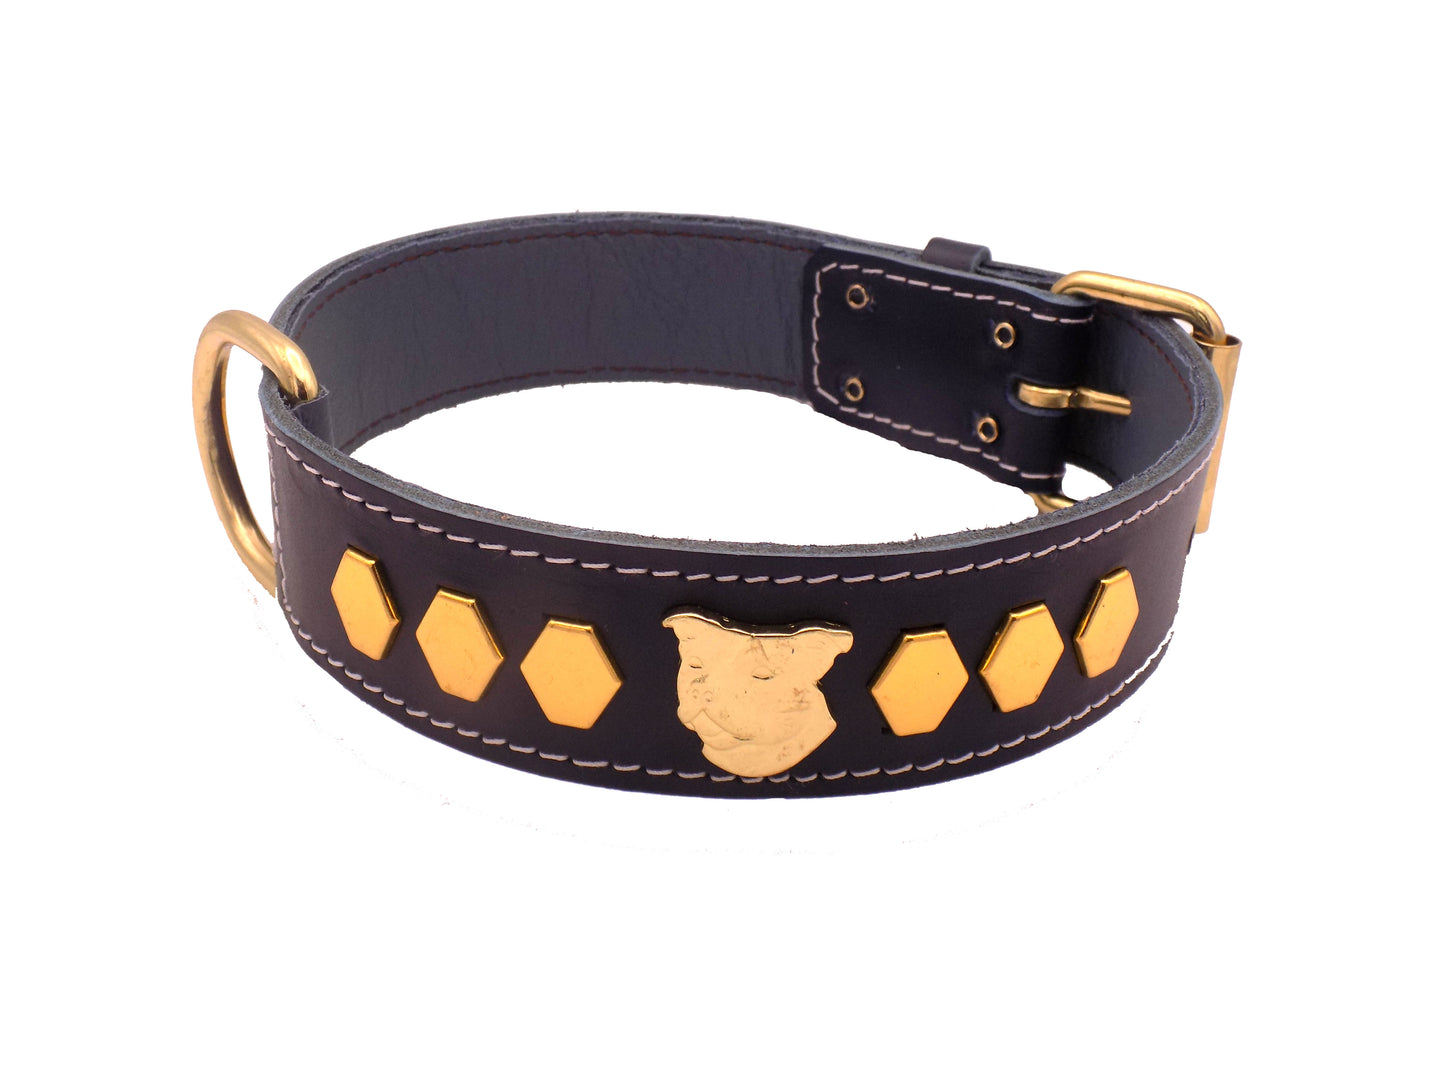 1.5" Staffy Leather Dog Collar with Unique Gold Decorative Design and Staffordshire Bull Terrier Badge